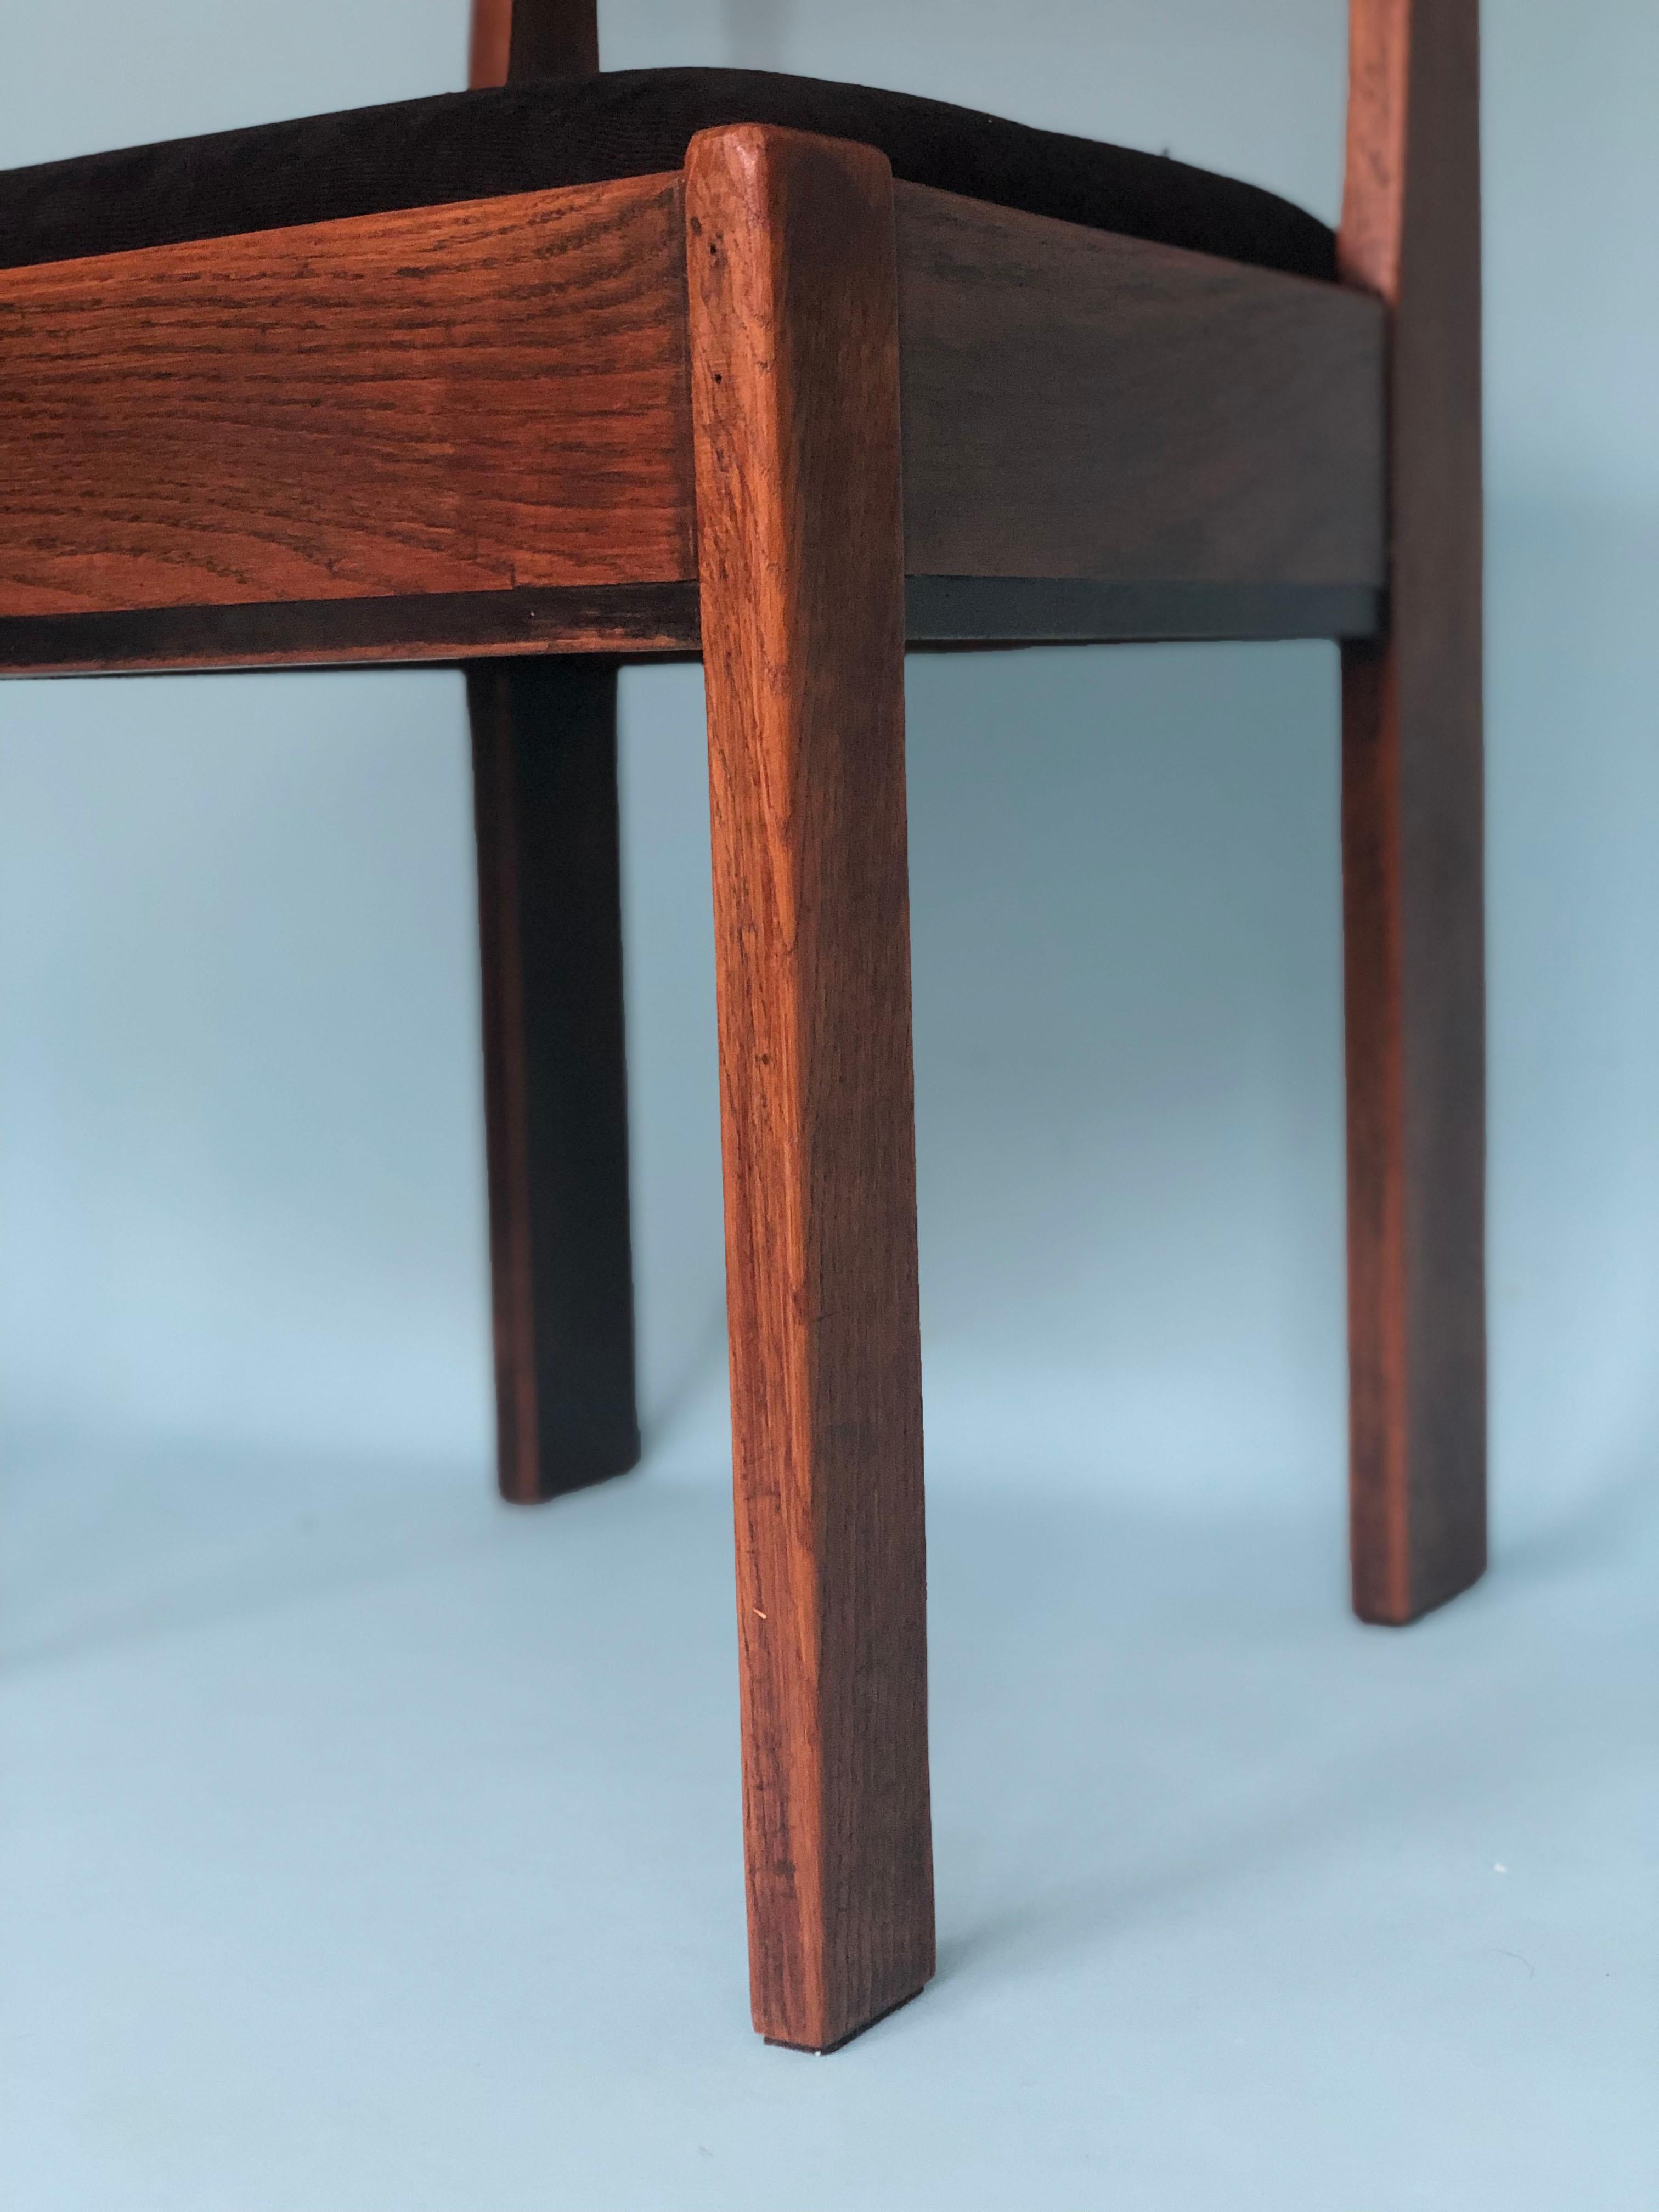 20th Century Oak Art Deco Design Chairs by J.A. Muntendam for L.O.V. Oosterbeek 1920s set of2